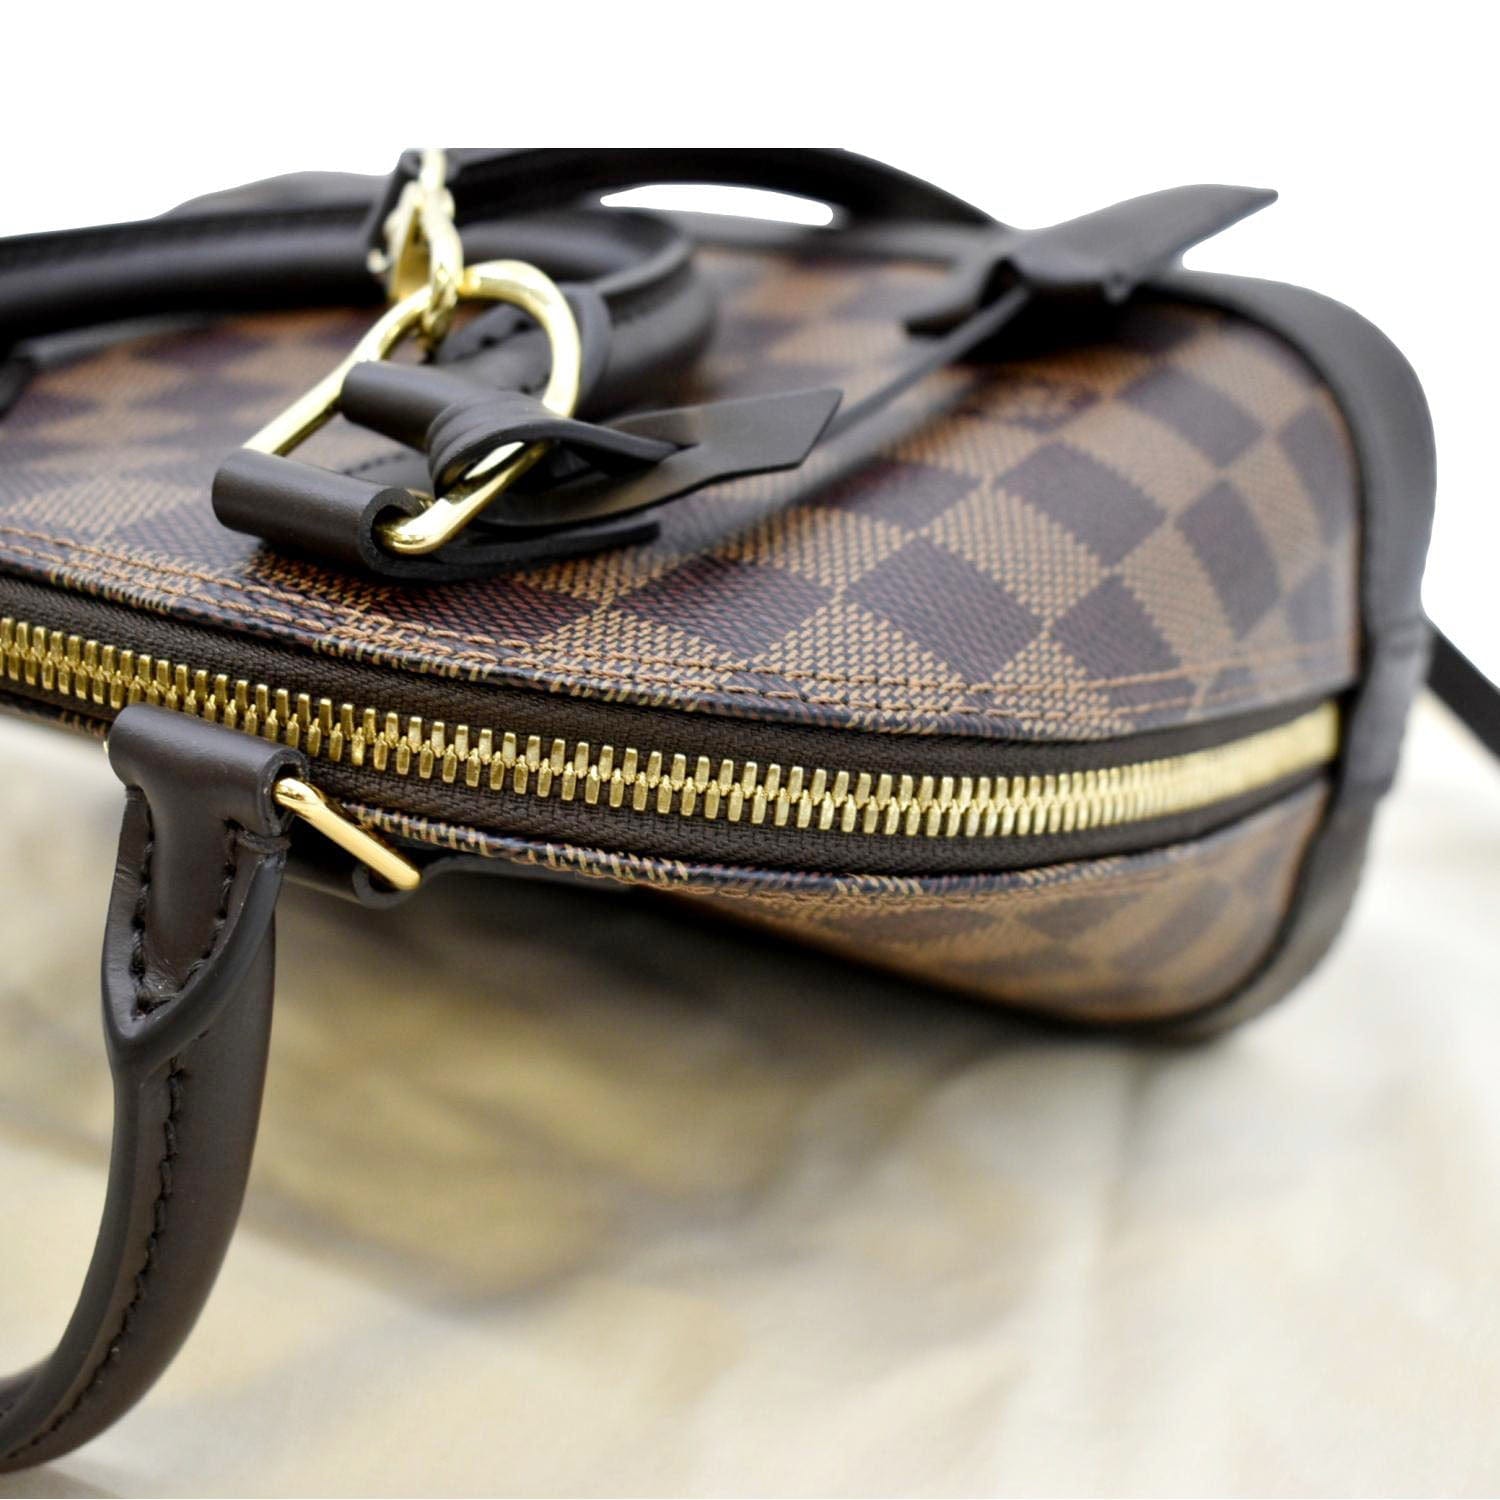 Louis Vuitton ALMA BB Attention to DETAILS Authentic Damier Ebene Cross and  Body Bag PearlYao 